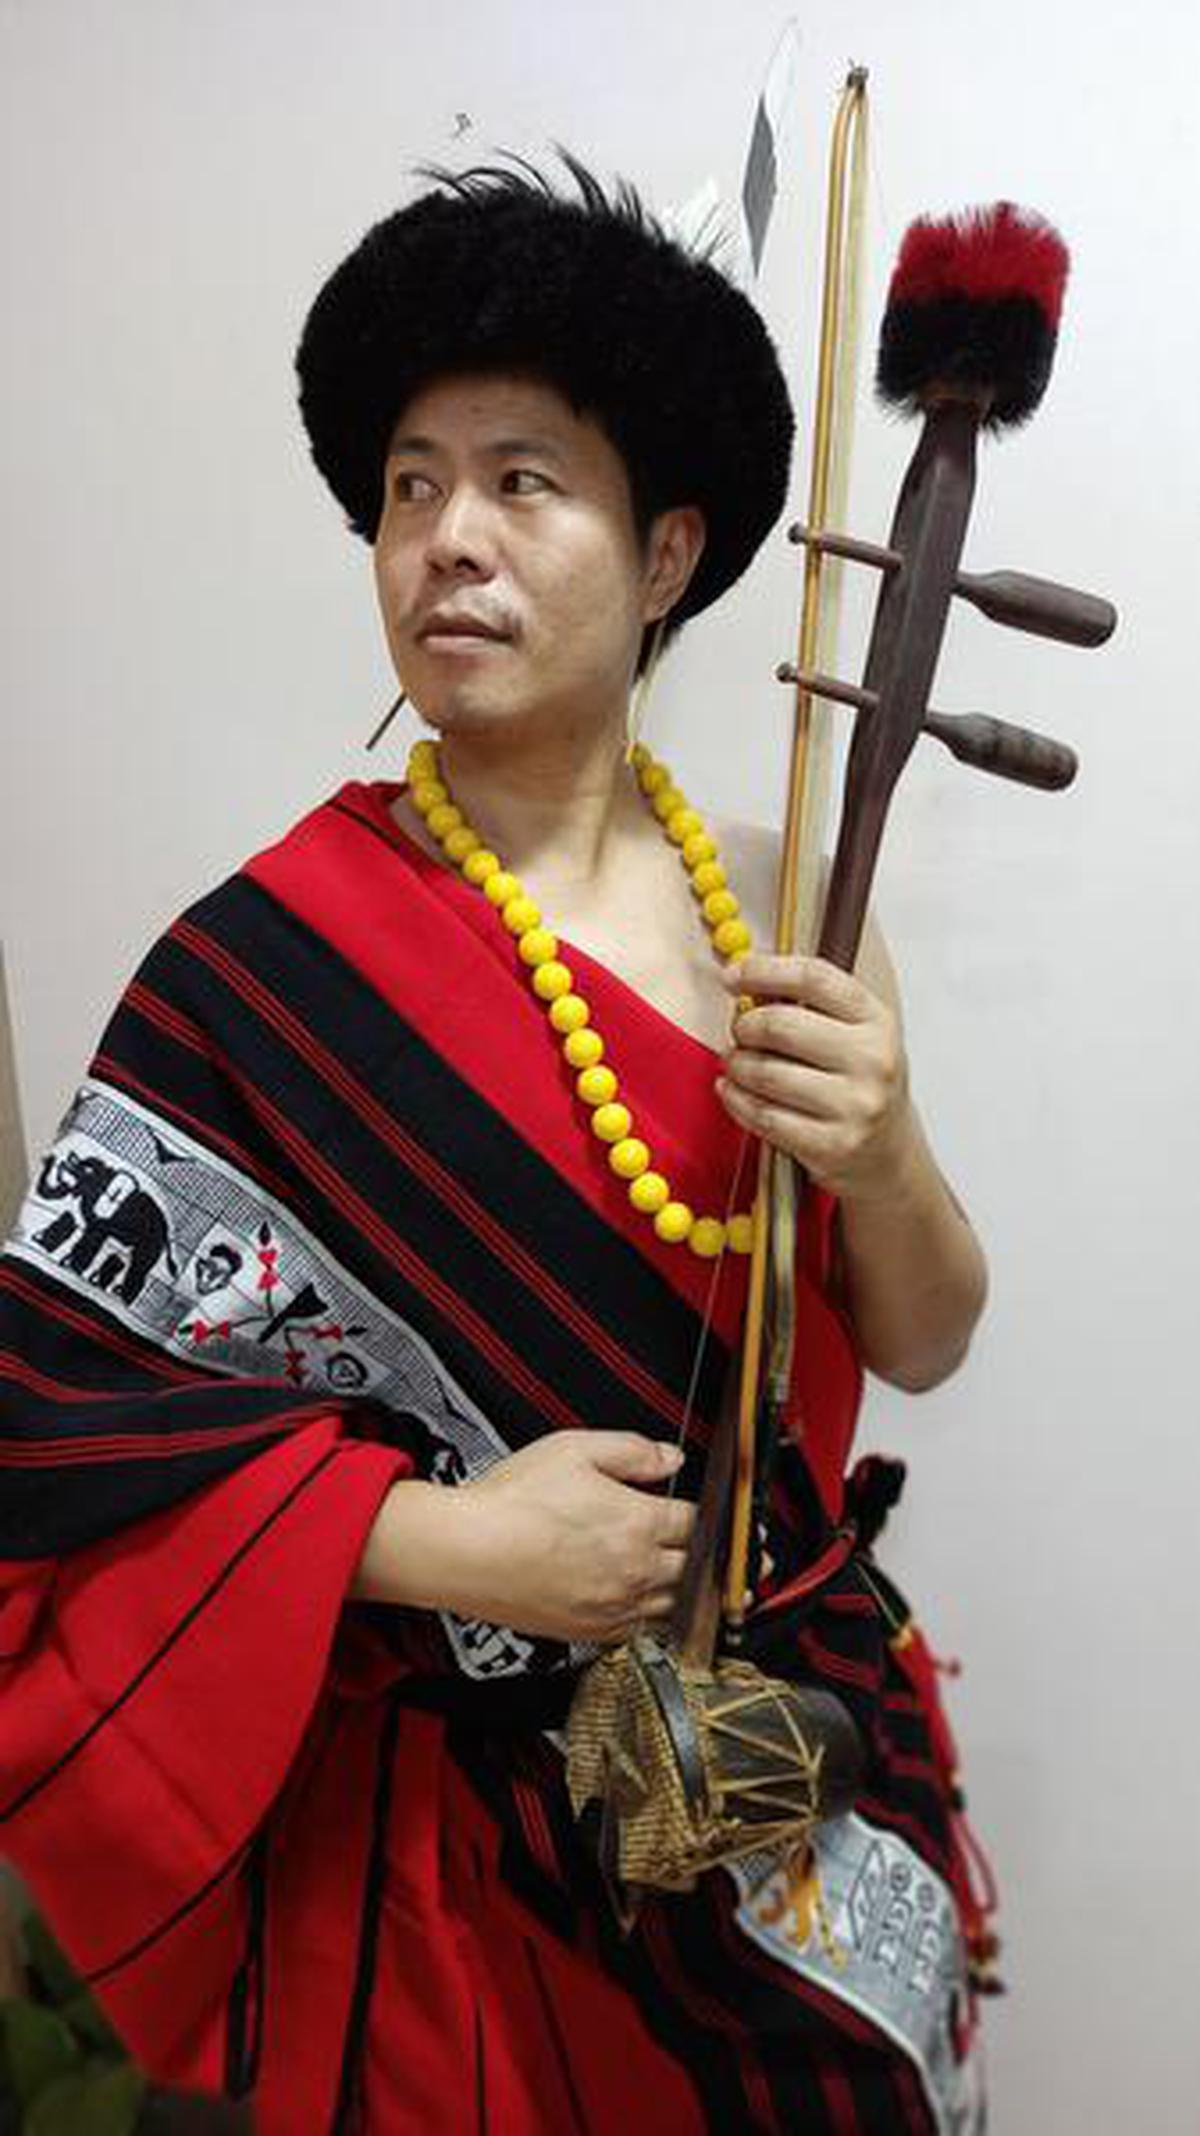 Naga folk musician Atso Chasie with the Gei-Ü, the string instrument he developed